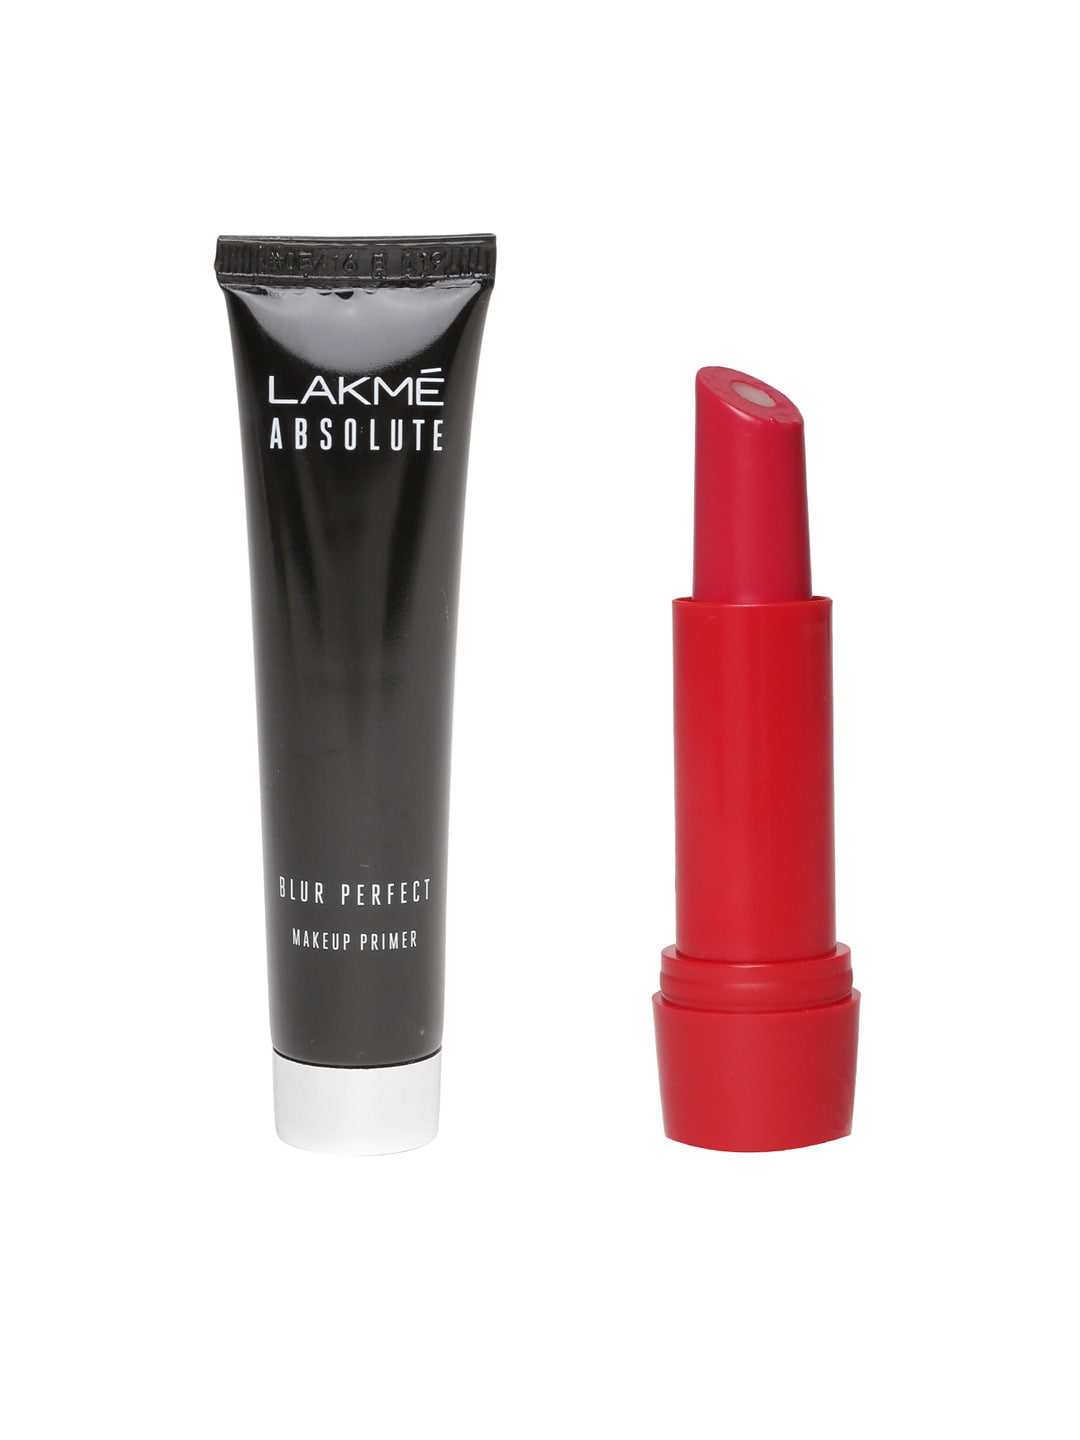 Lakme Set of Absolute Blur Perfect Makeup Primer & Lip Love Cherry SPF 15 Lip Balm Price in India